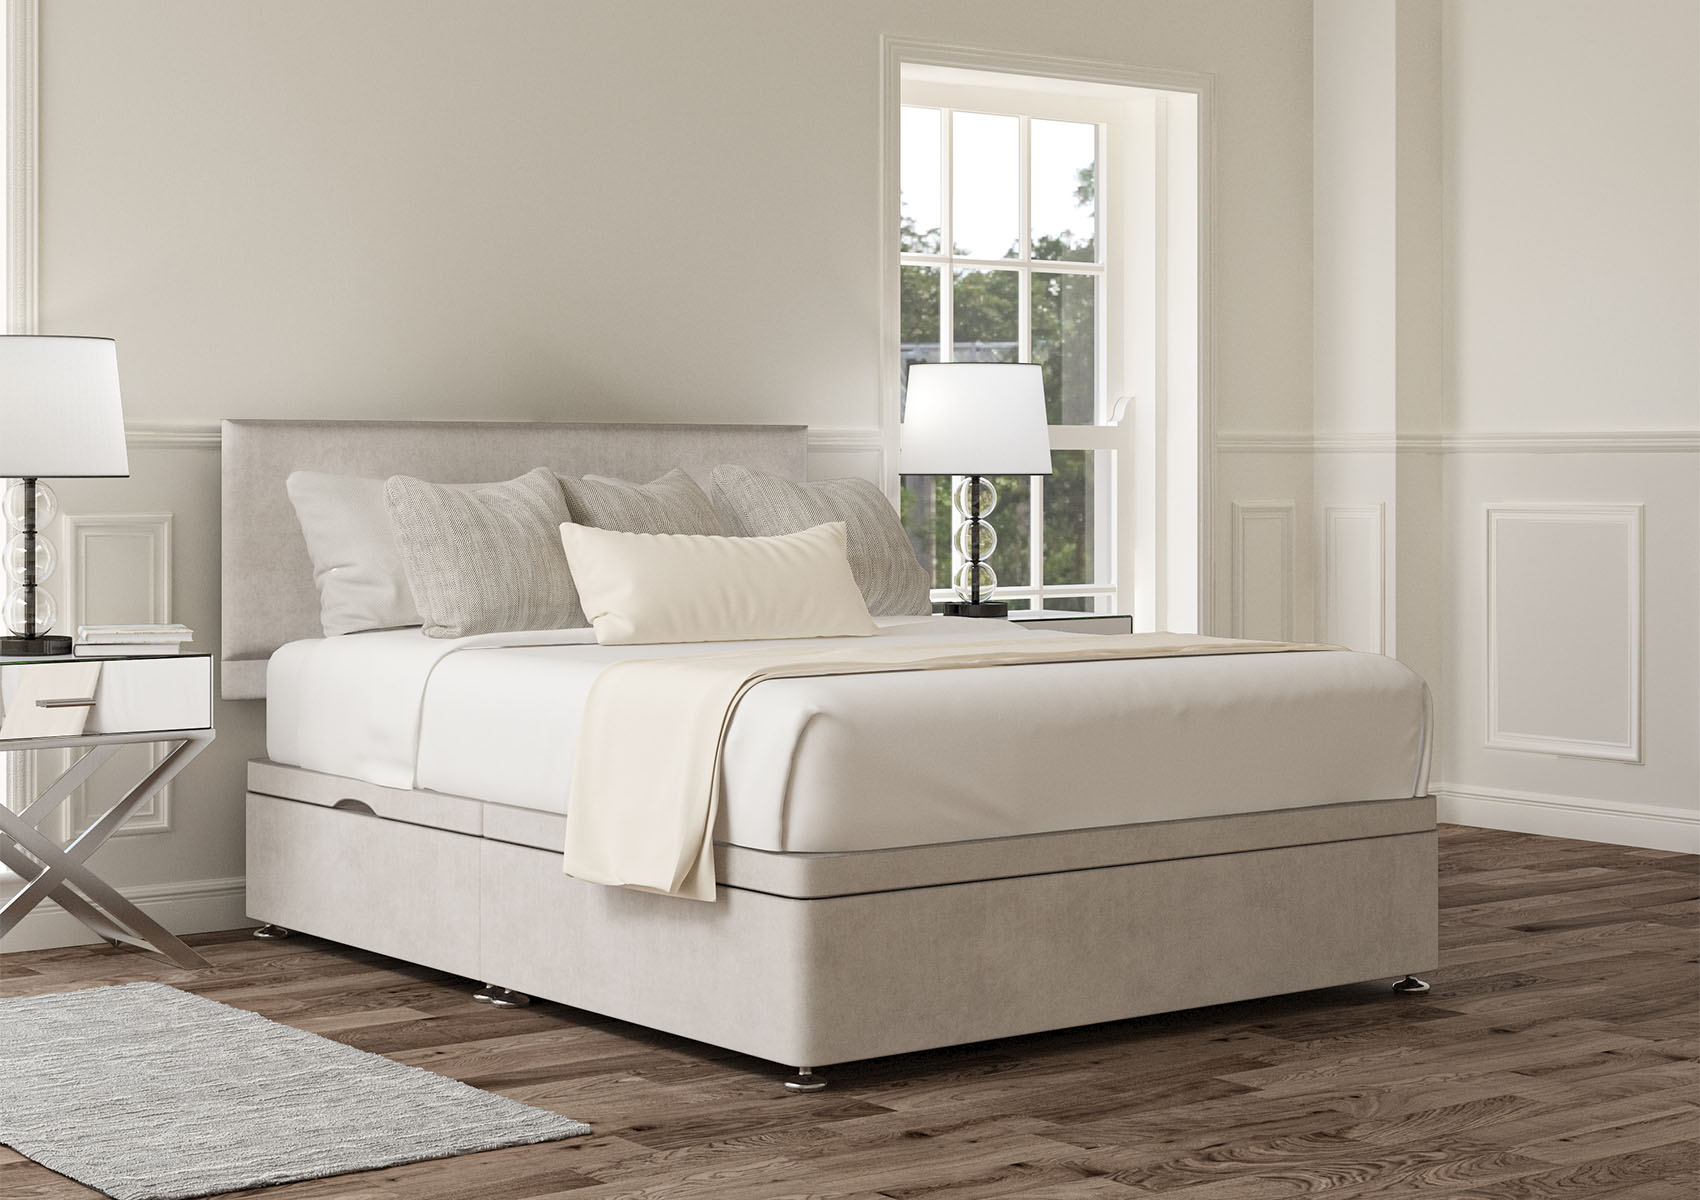 View Henley Siera Silver Upholstered King Size Ottoman Bed Time4Sleep information